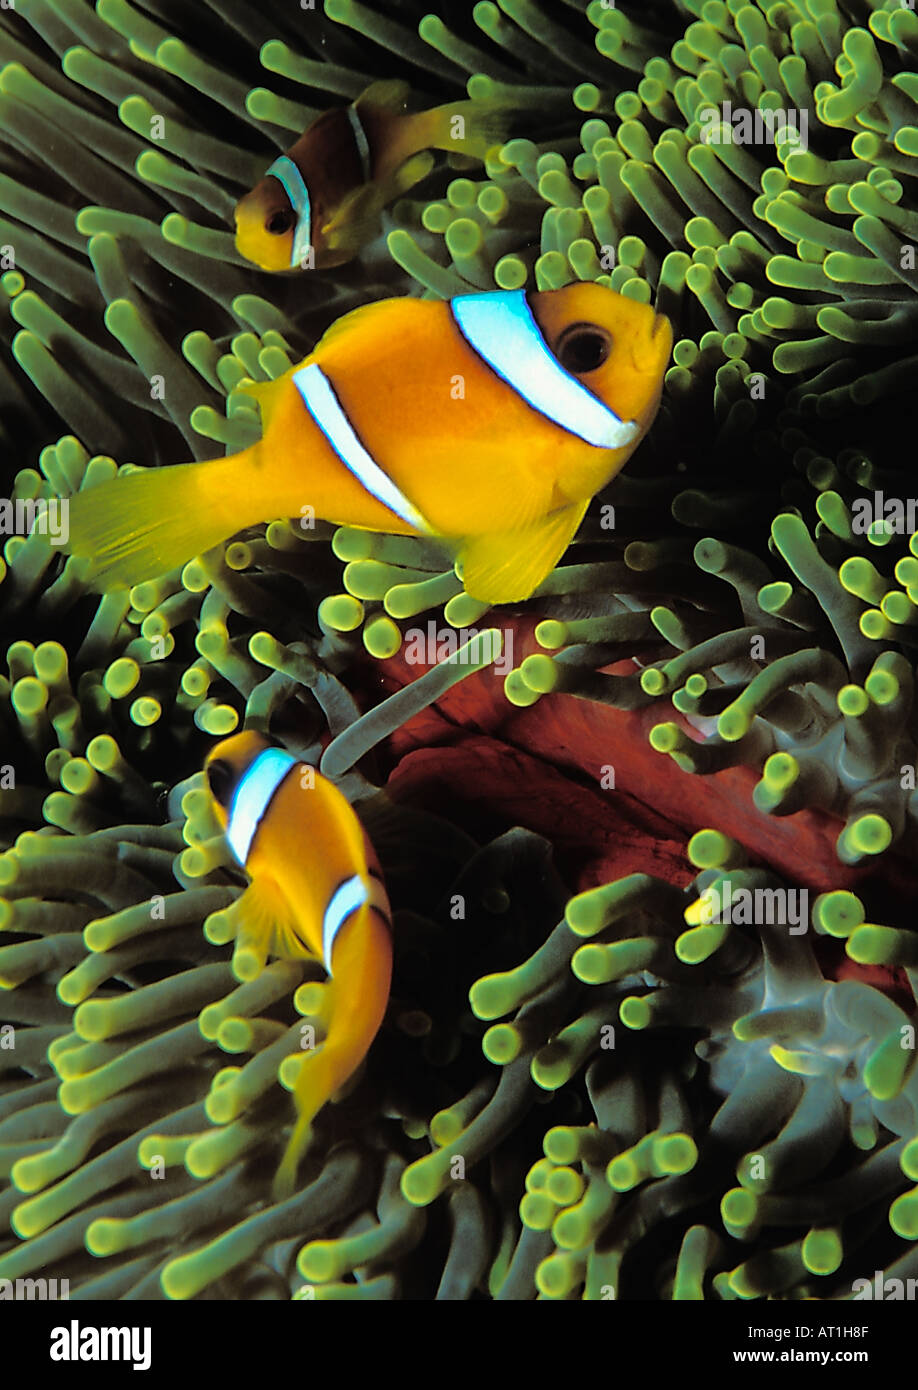 Amphiprion bicinctus Red Sea two banded clownfish Clown fish Fish Red Sea Indian Ocean Egypt Sea anemones Anthozoa Cnidaria Stock Photo